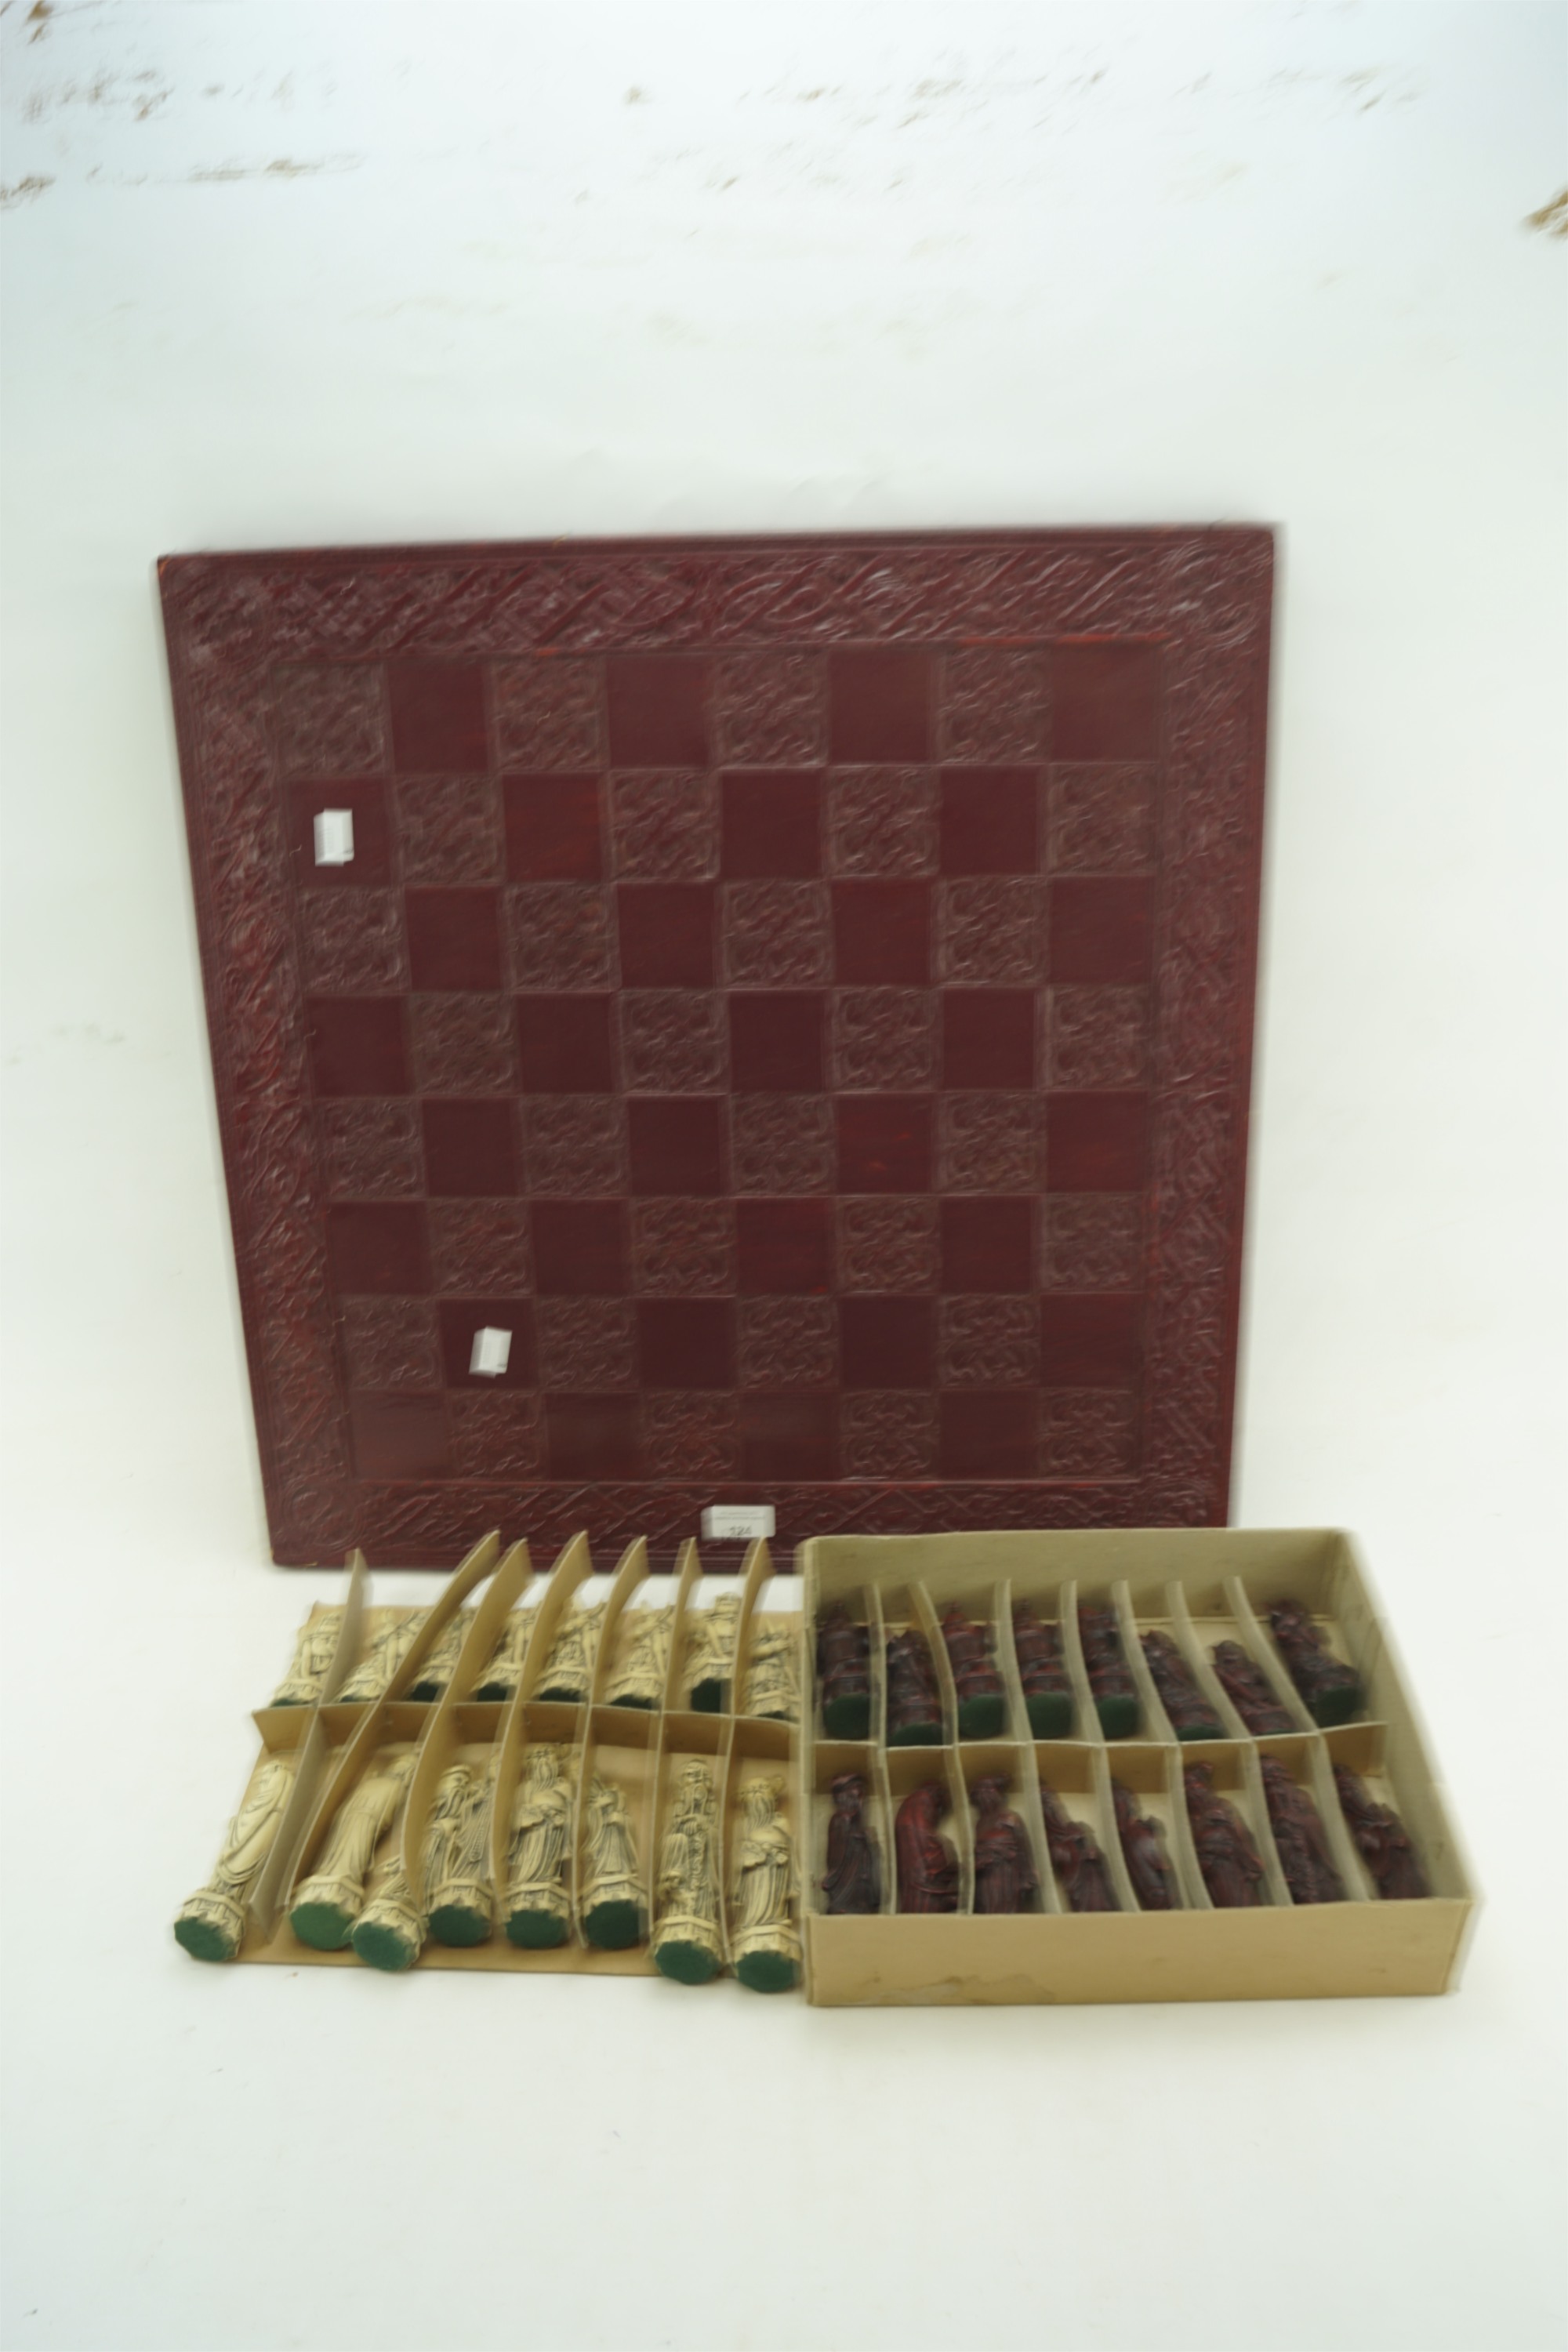 A 20th century resin Chinese chess set with chess board.